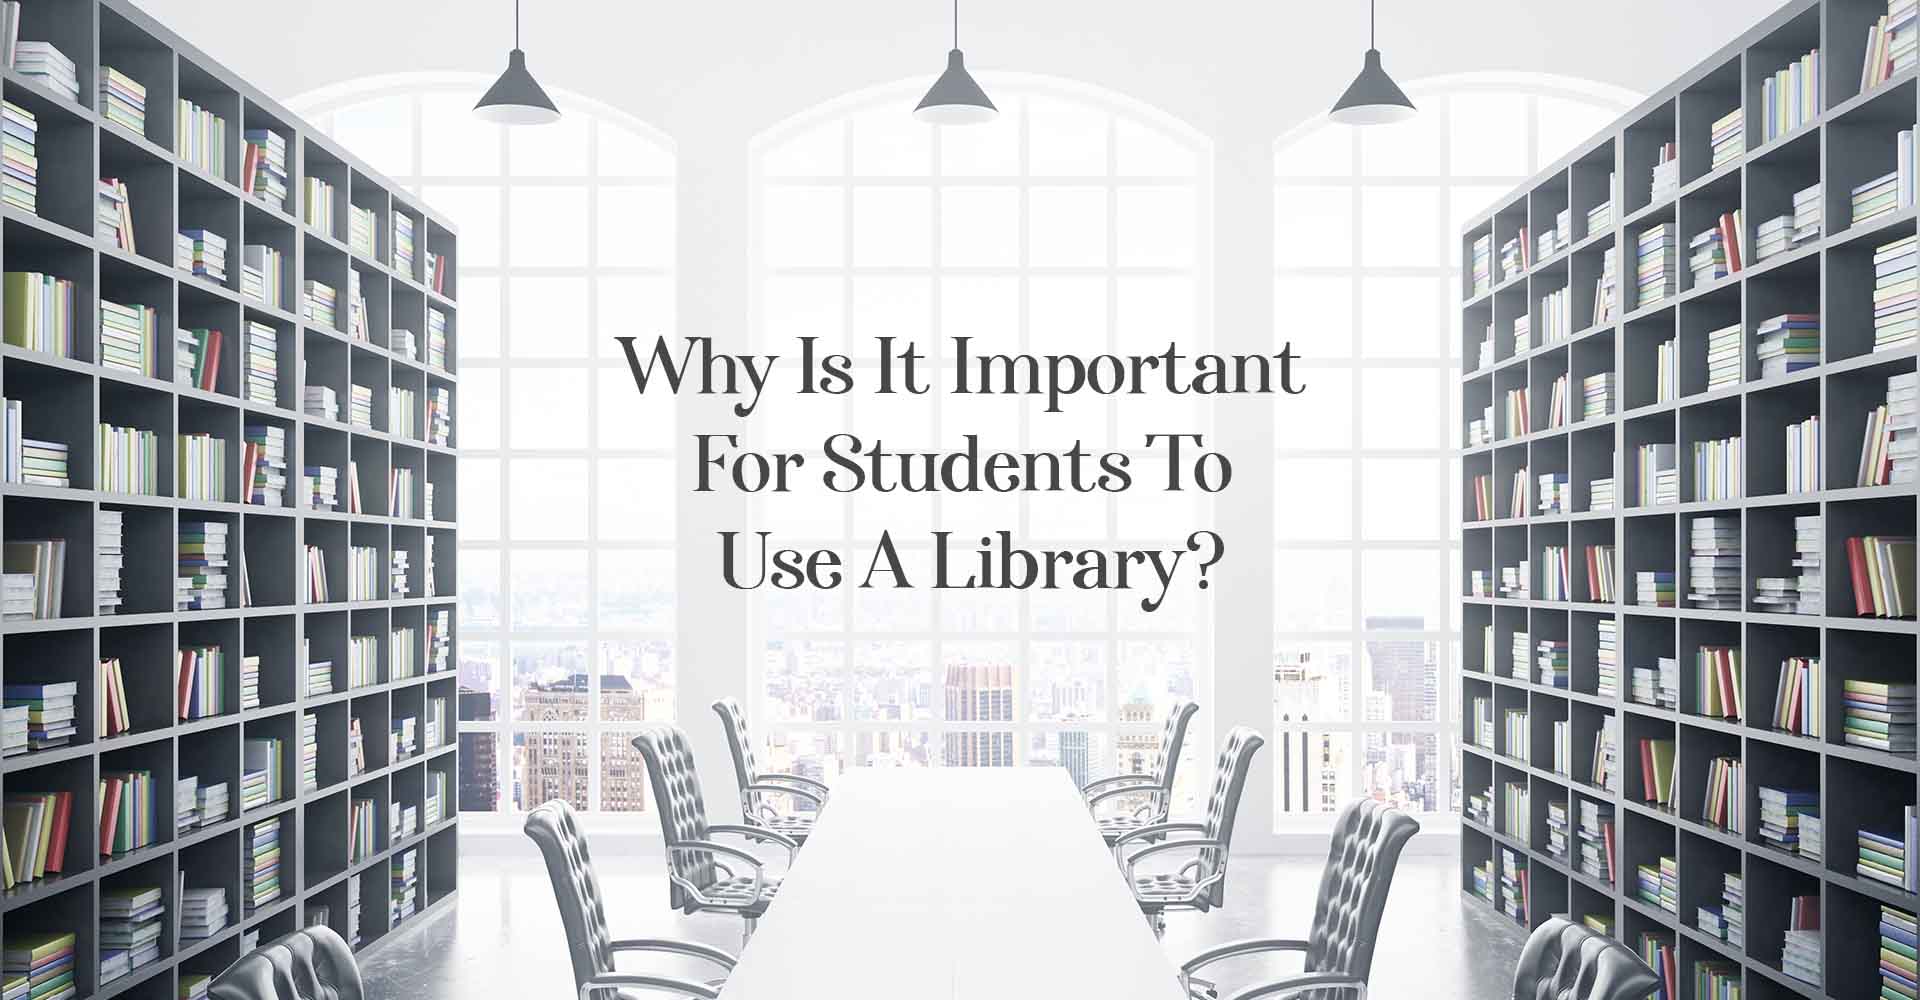 Why Is It Important For Students To Use A Library?